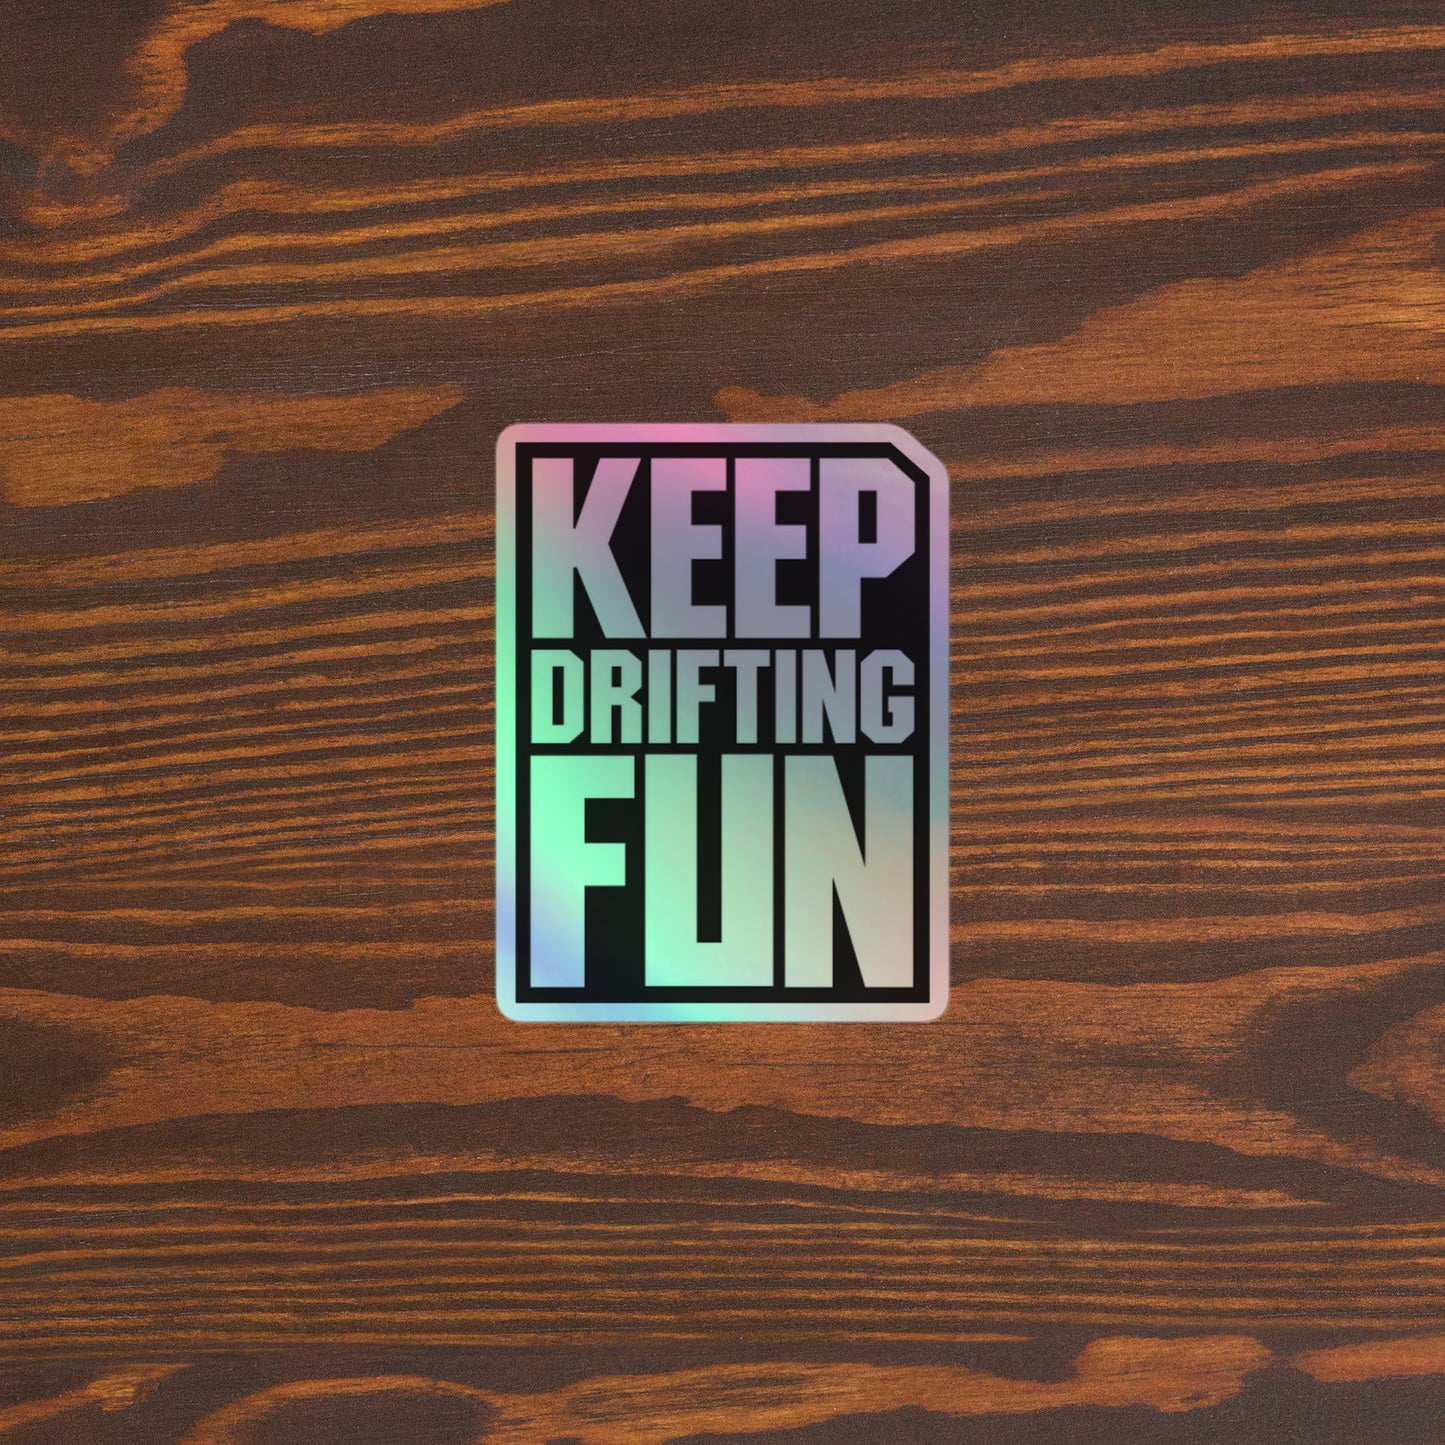 KEEP DRIFTING FUN - Holographic stickers